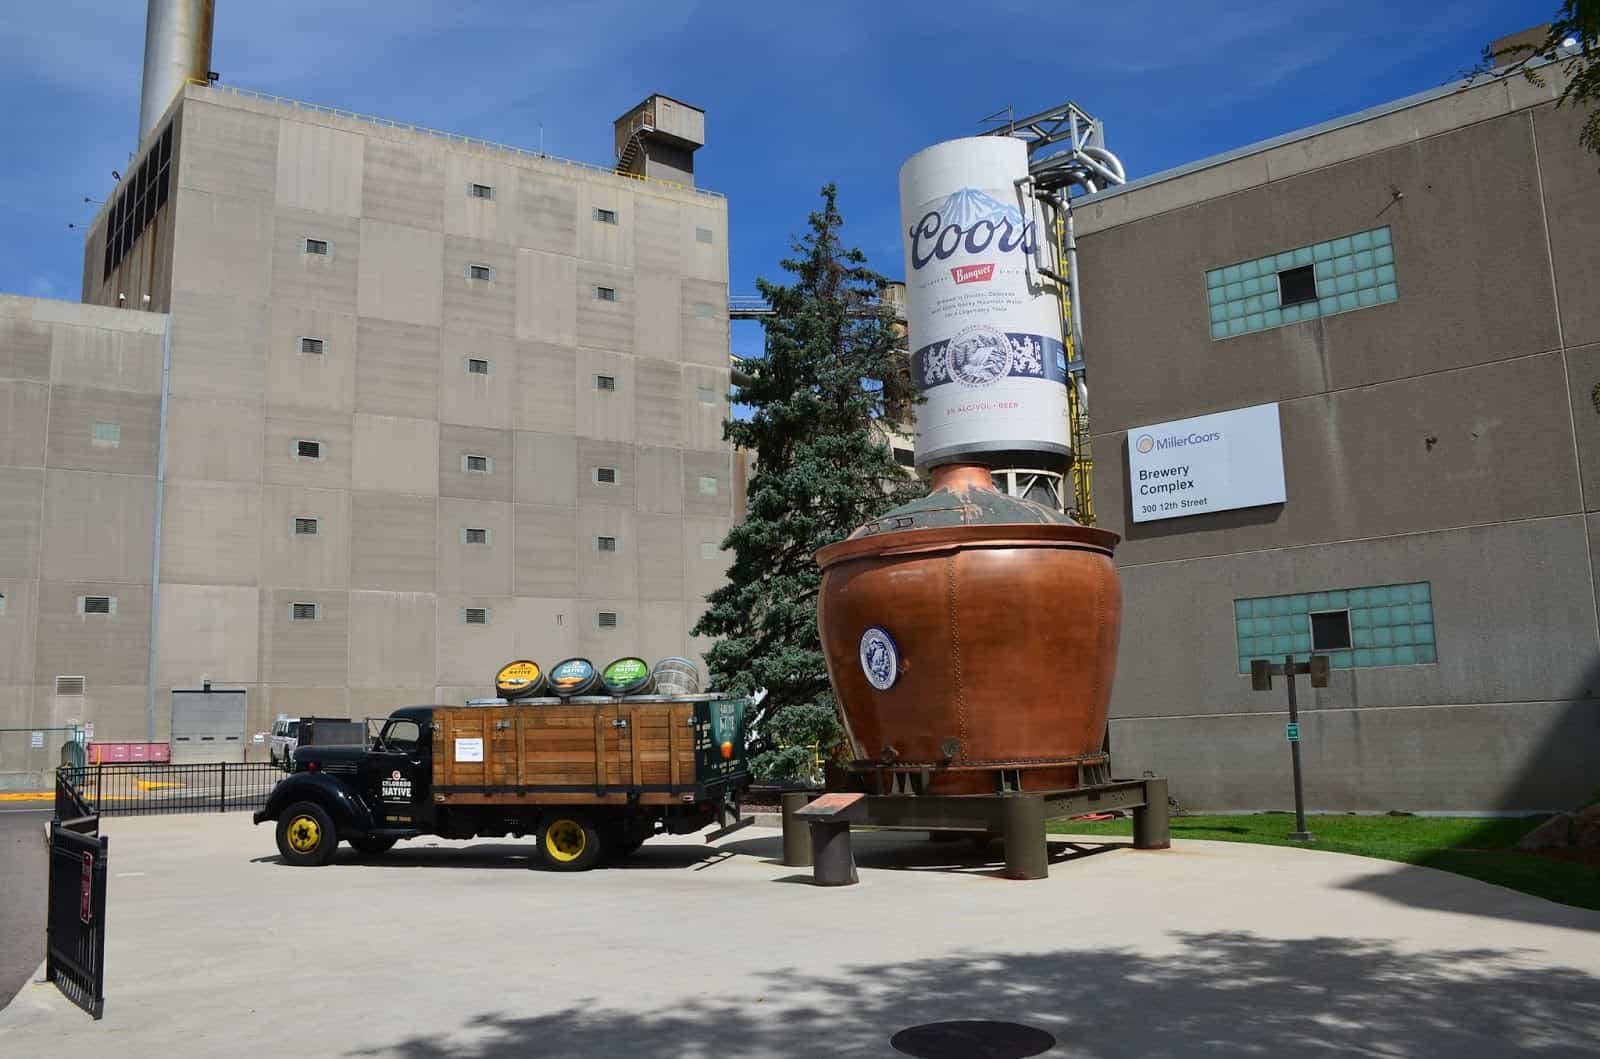 Coors brewery in Golden, Colorado